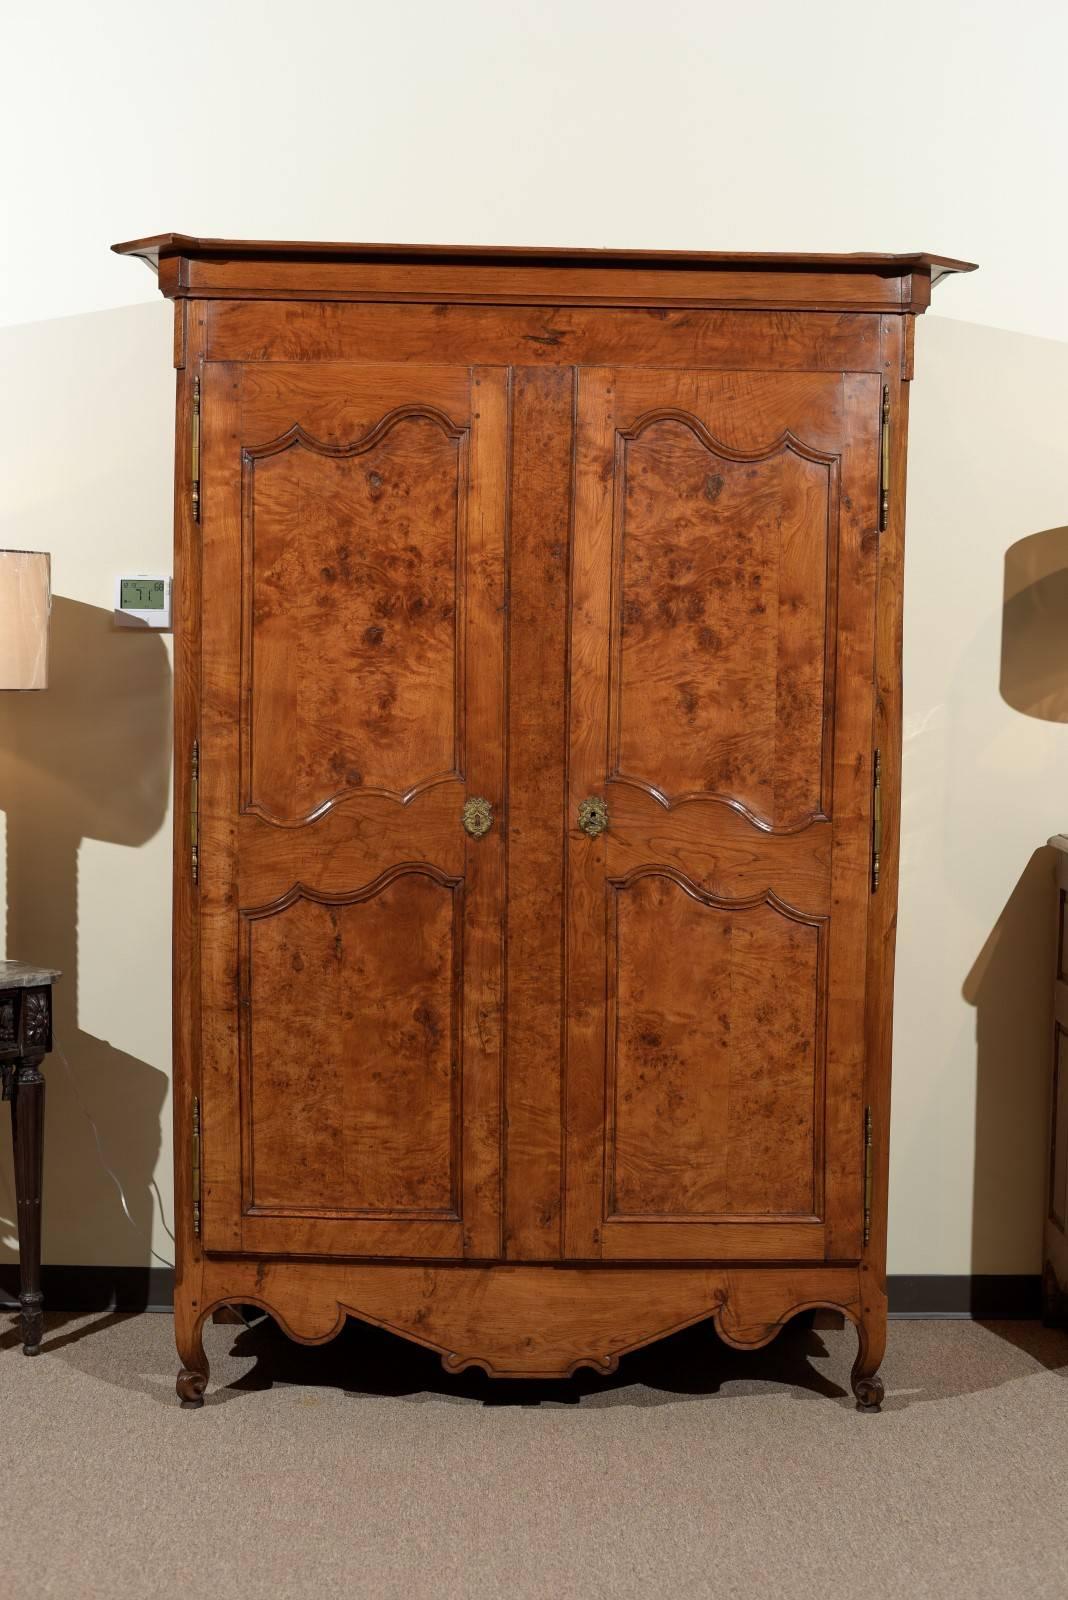 19th century French armoire in burled ash, circa 1850
This very handsome armoire grows on you. The burled wood is outstanding and the more you look at it the more you are impressed with the design the wood takes on. I also like the angled corners